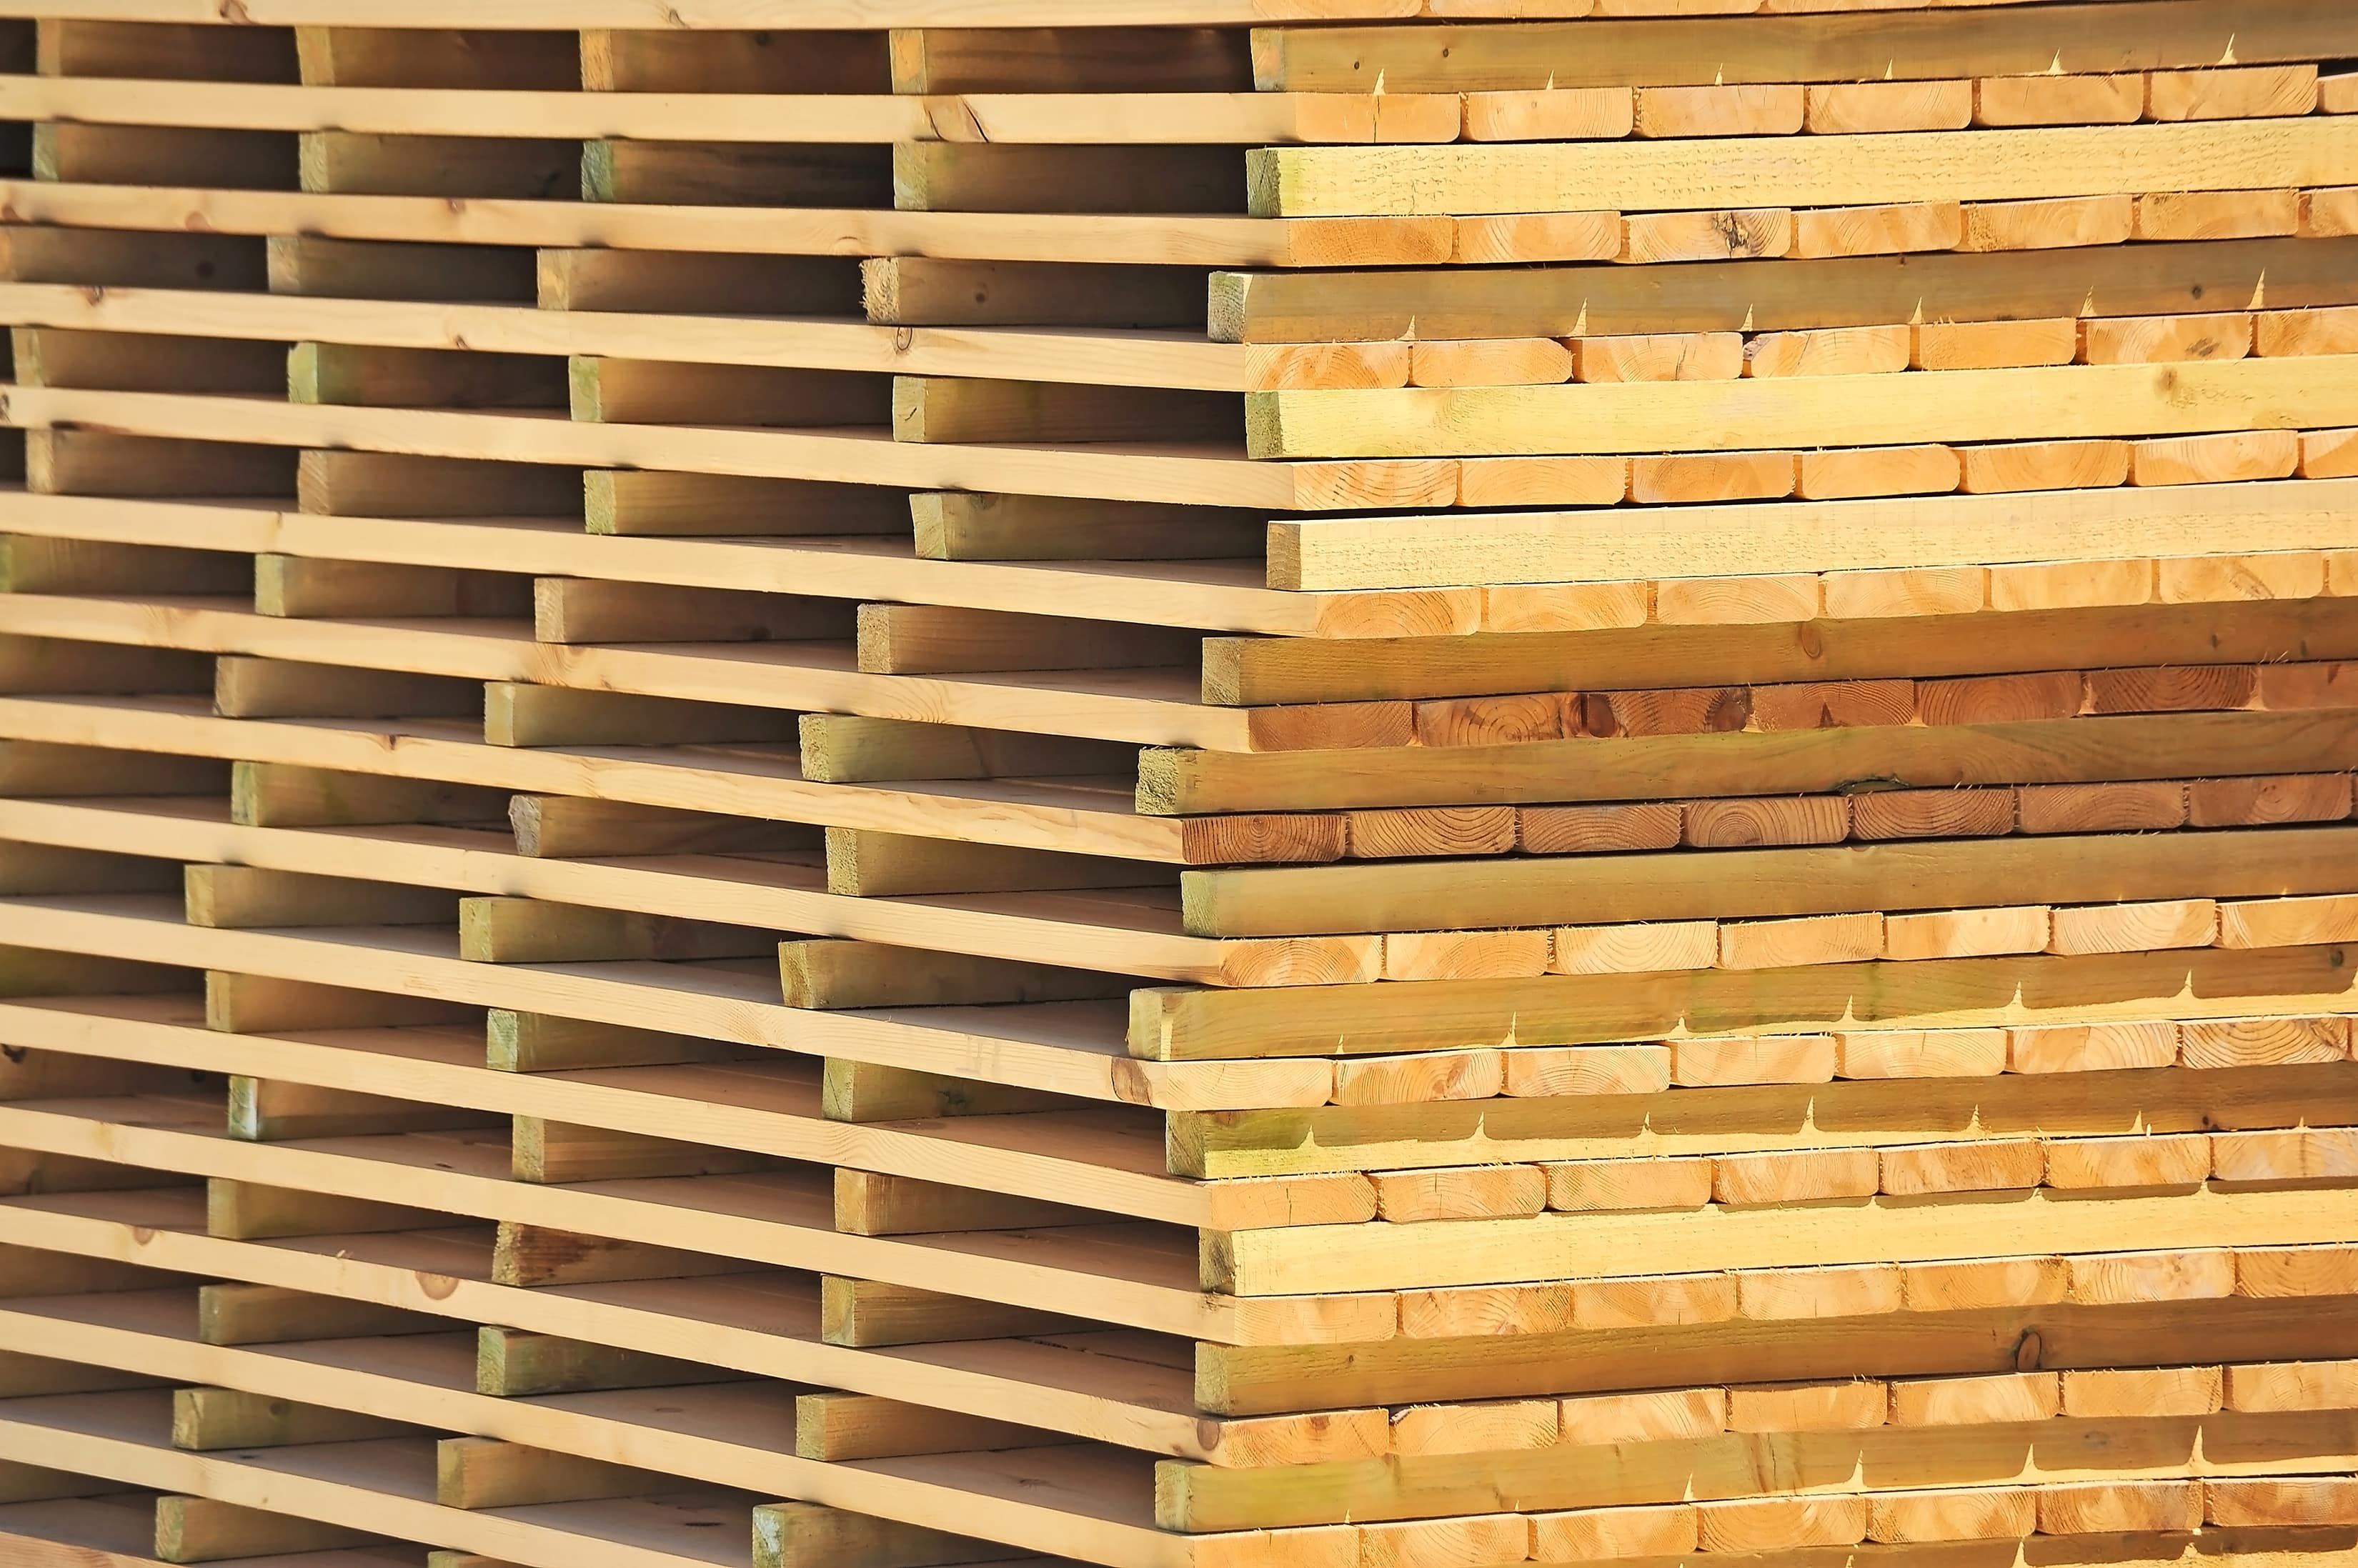 We plan to start trading dried timber and provide wood drying services